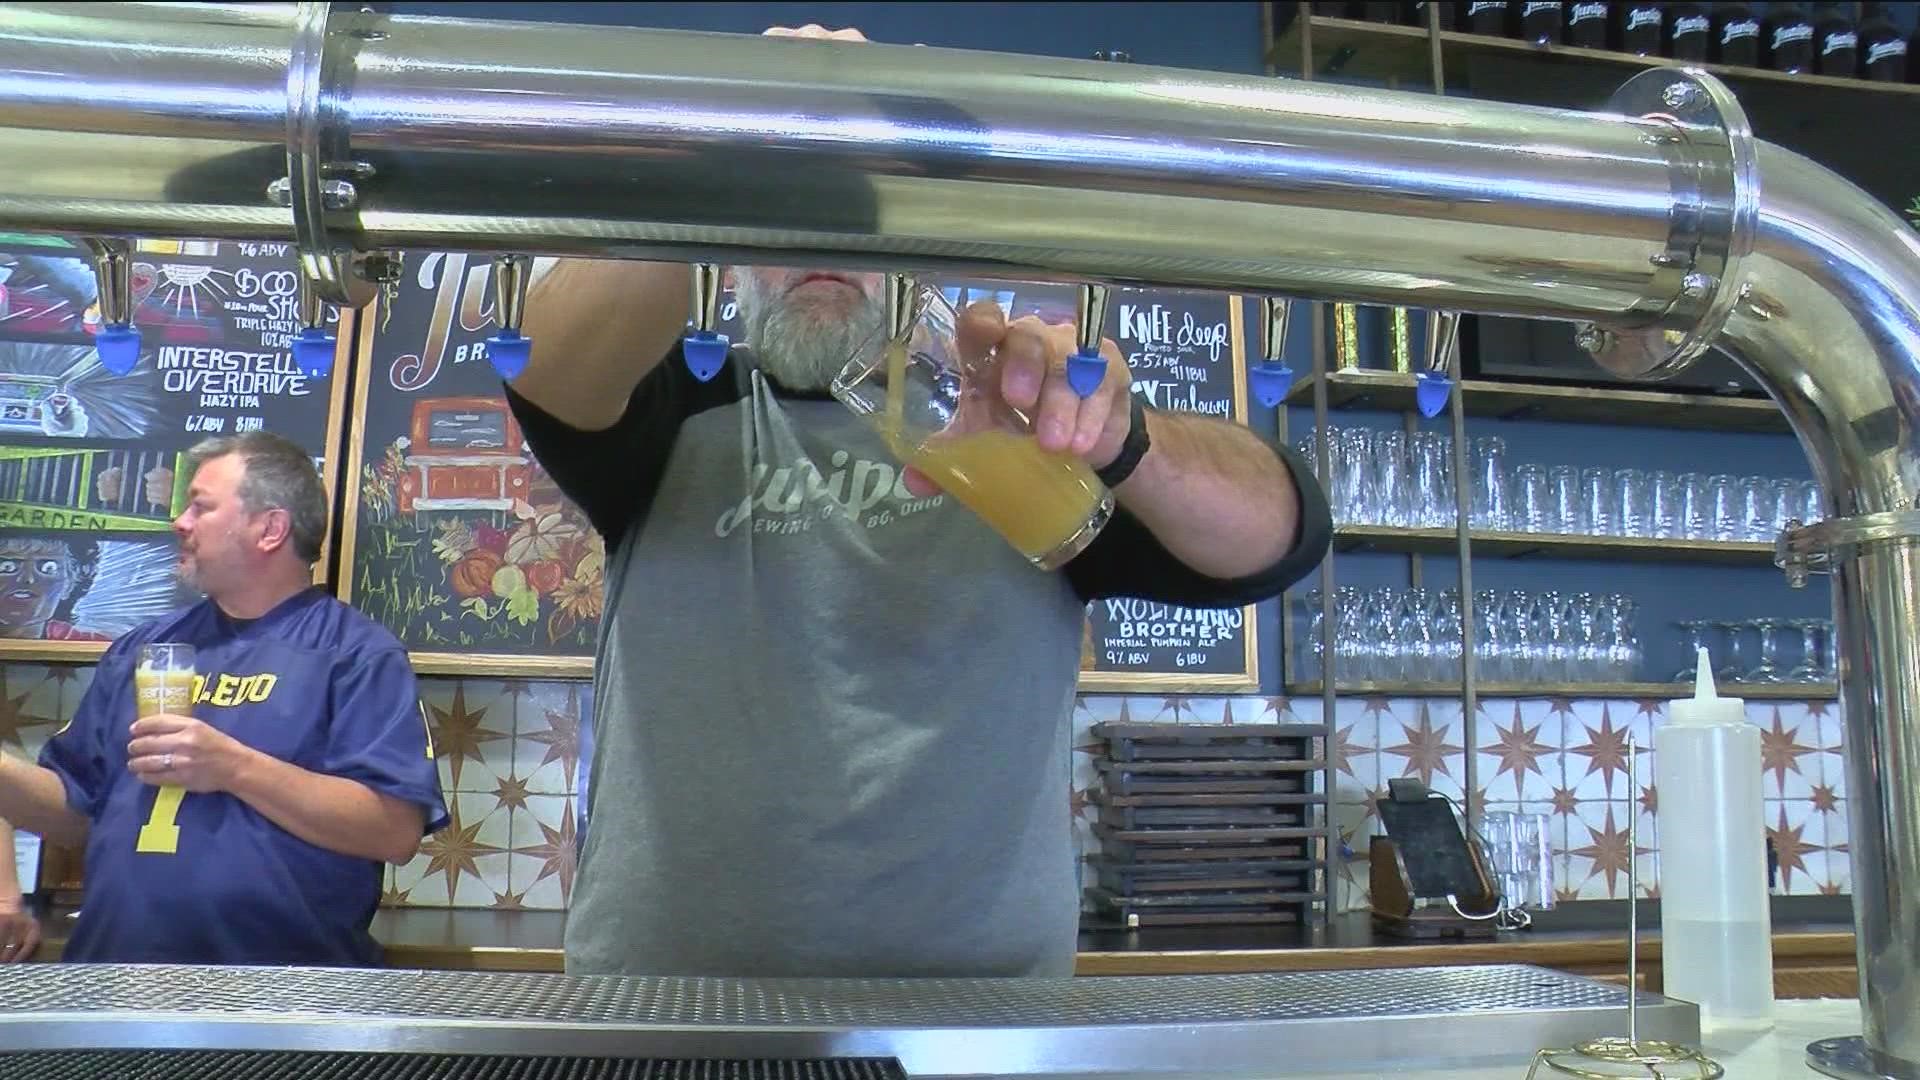 Earnest Brew Works and Juniper Brewing Company are raising a glass and starting a friendly competition of their own for the storied Battle of I-75.